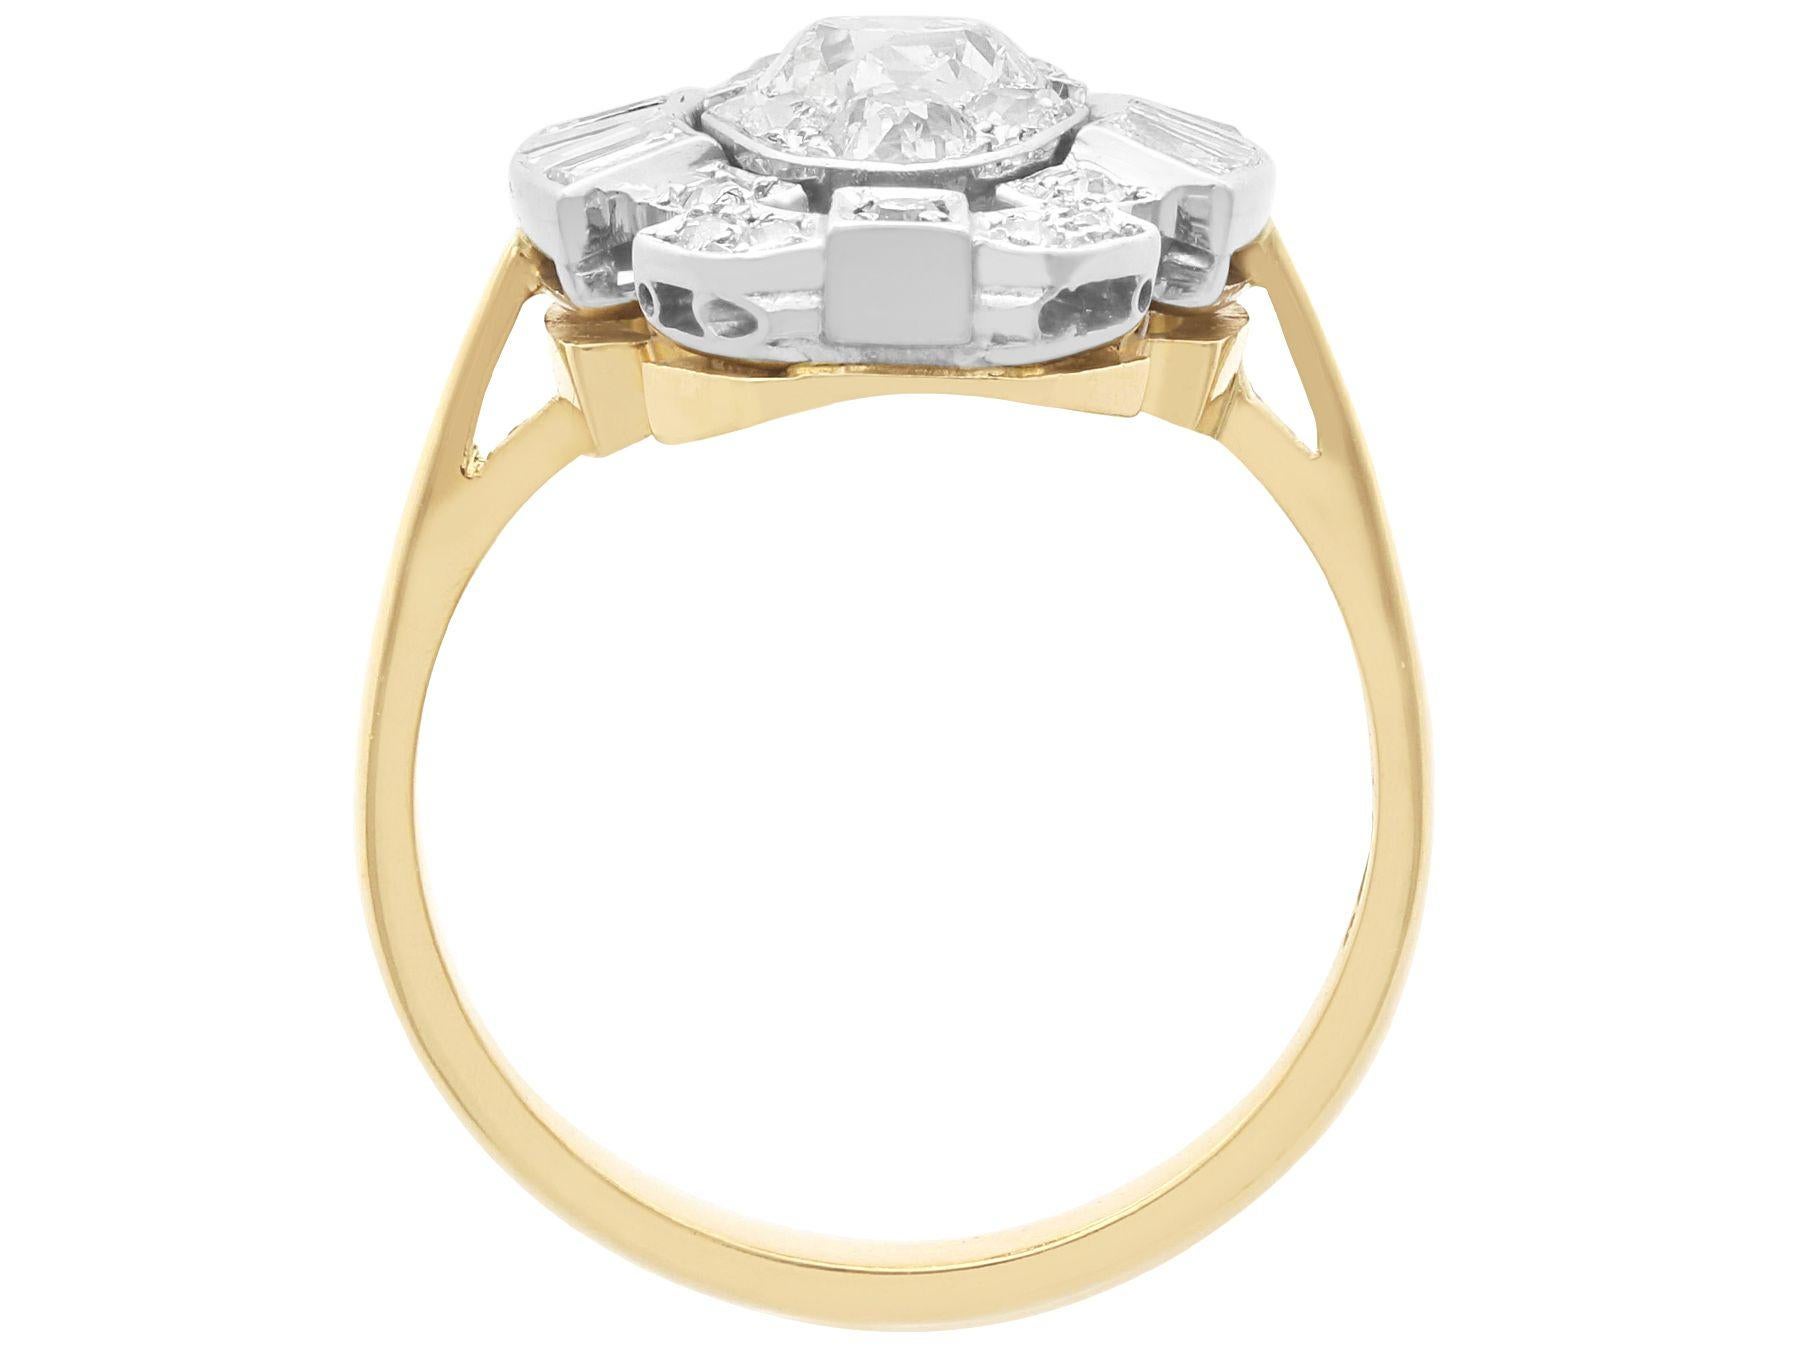 Women's or Men's Art Deco 1.83 Carat Diamond and 18K Yellow Gold Cocktail Ring For Sale